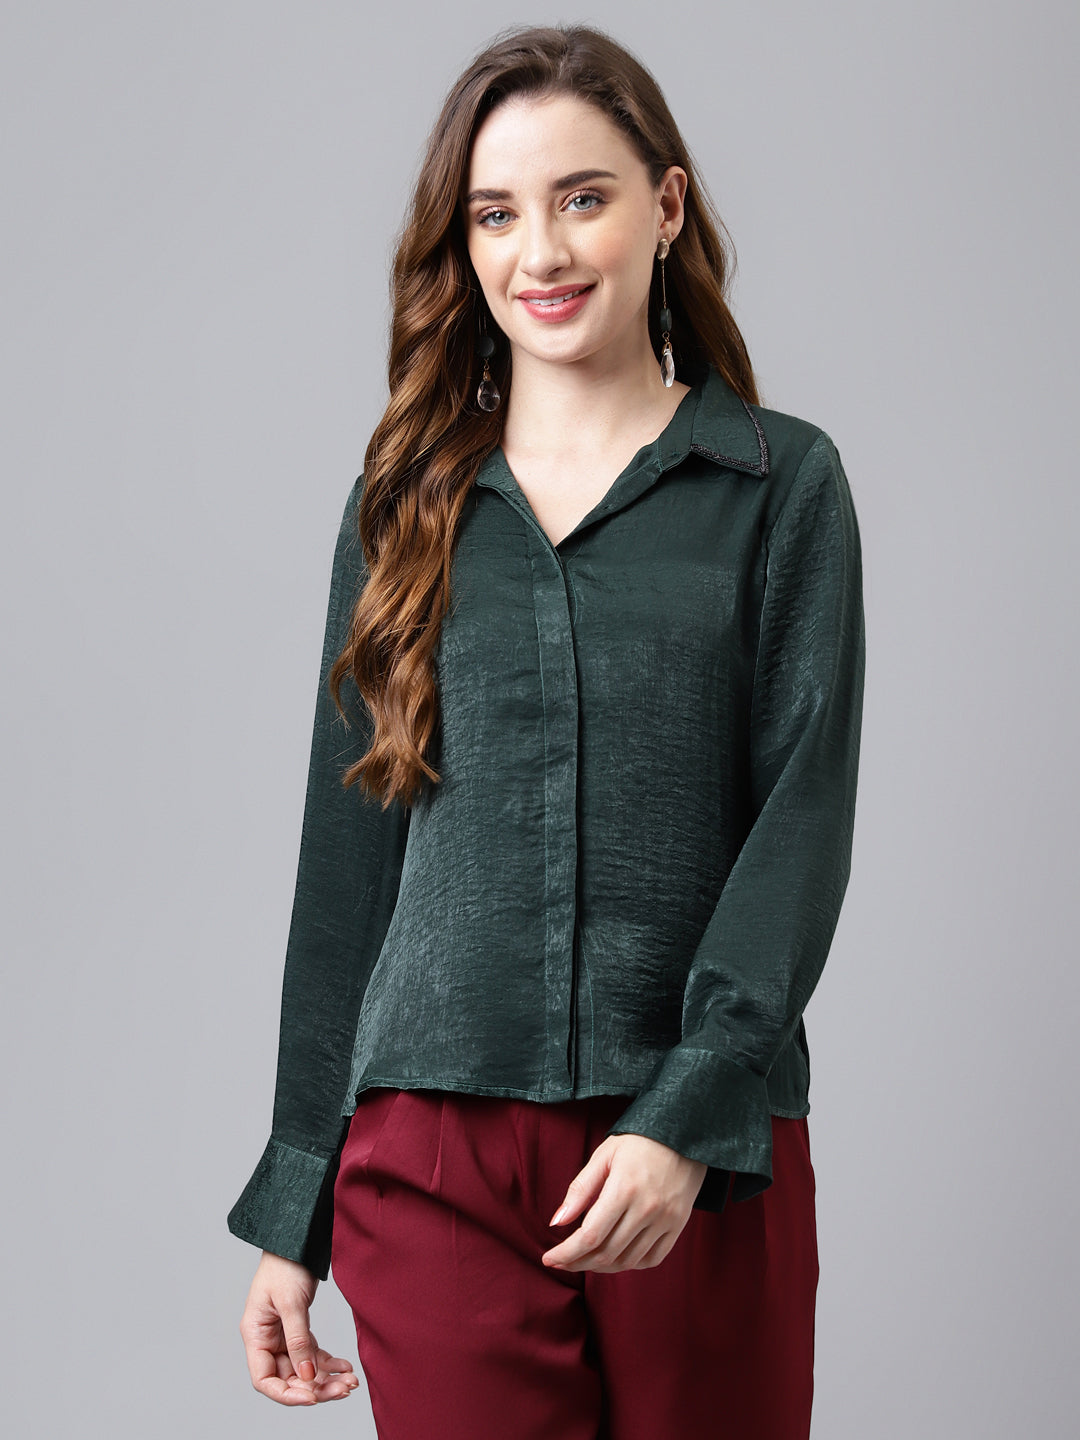 Greenbotle Shirt Collar Long Sleeves Checked Top For Casual Wear